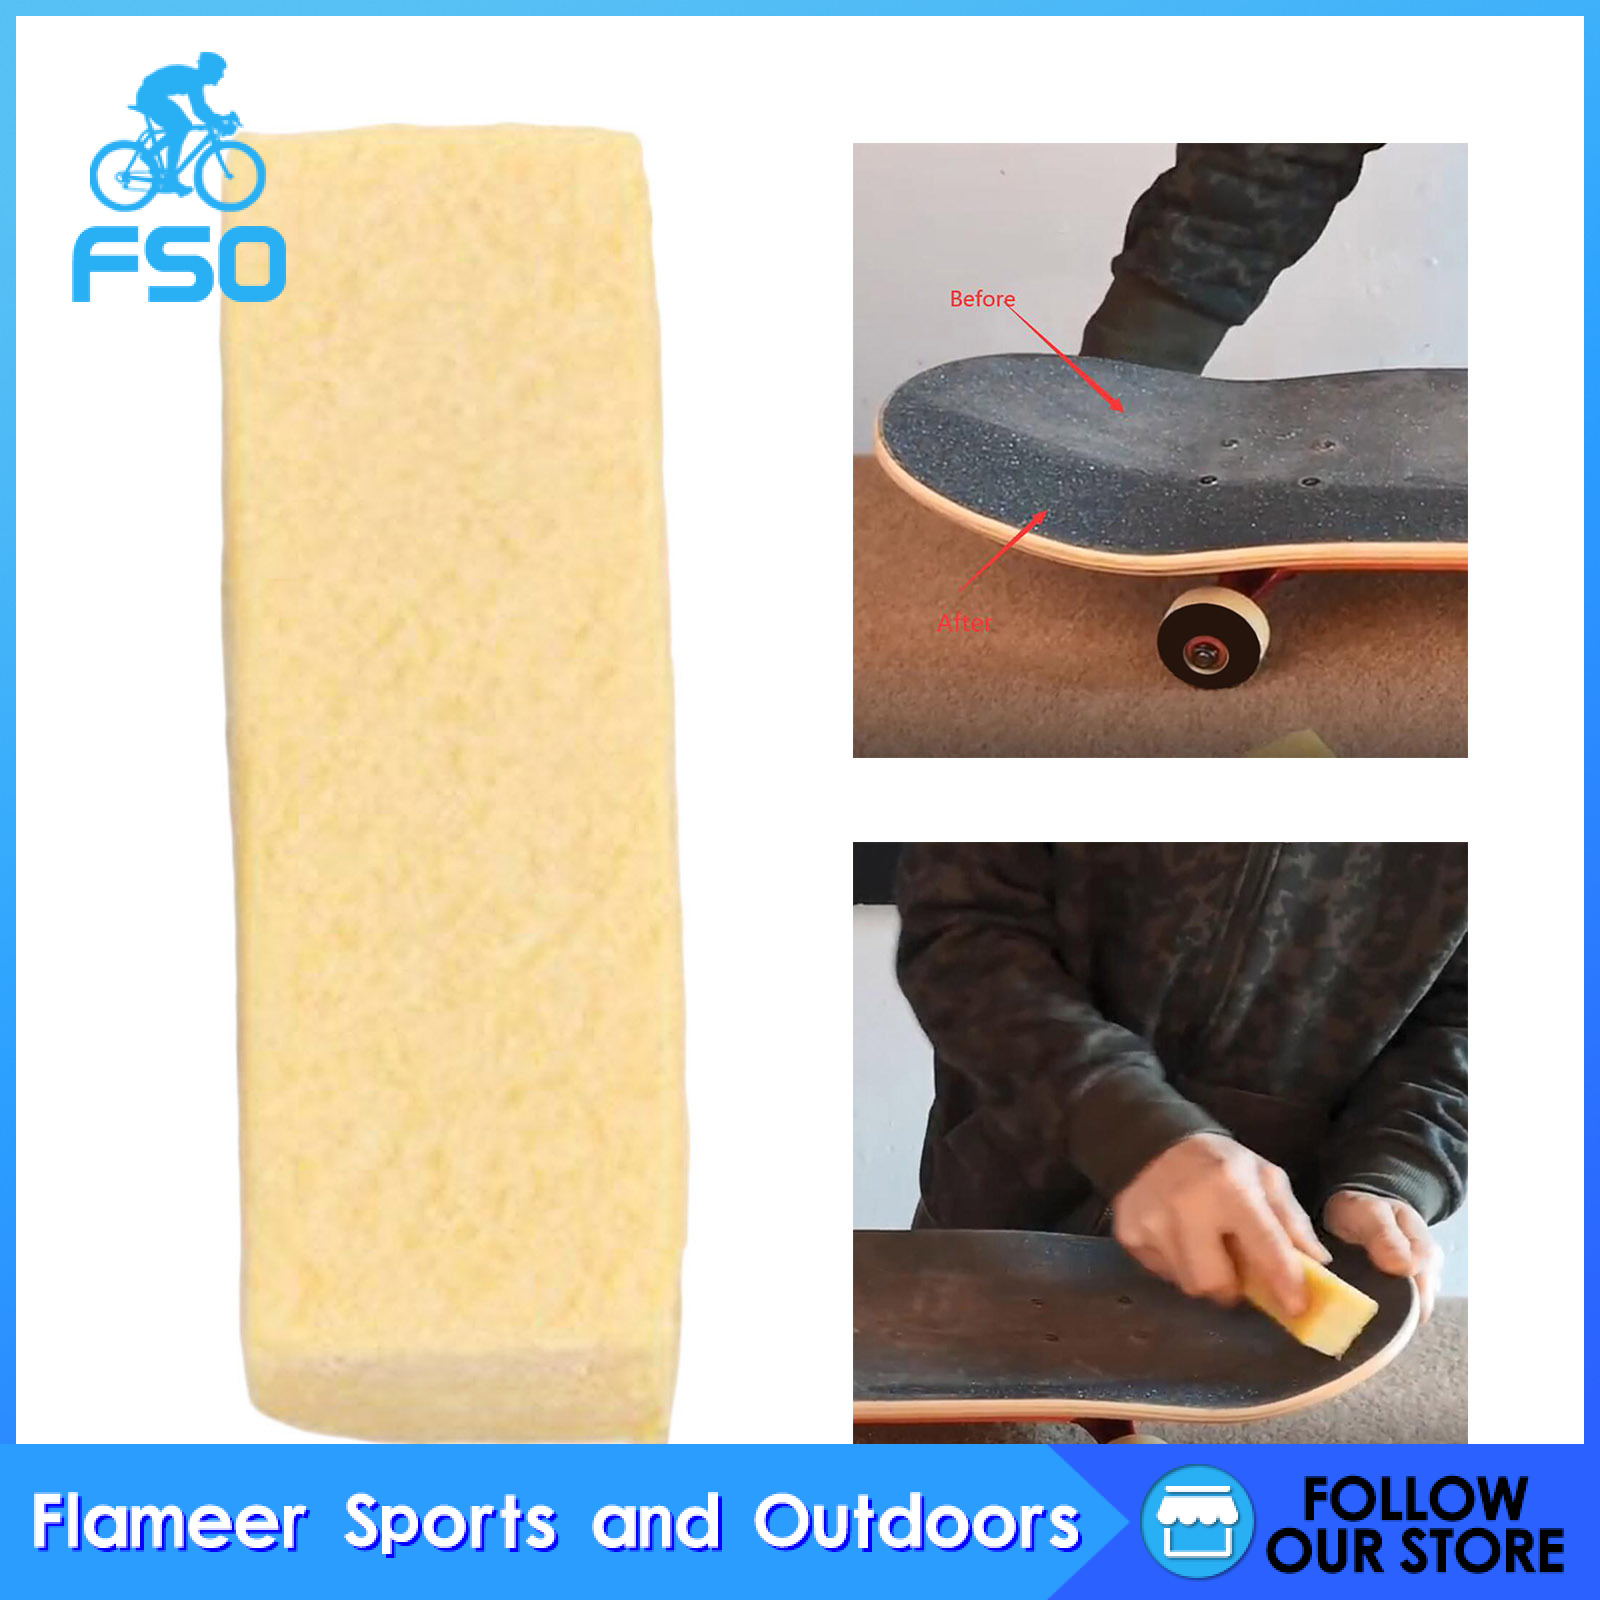 FLAMEER Rubber Cube Skateboard Grip Tape Cleaner/Dirt Remover/Erase Cleaning Tool 